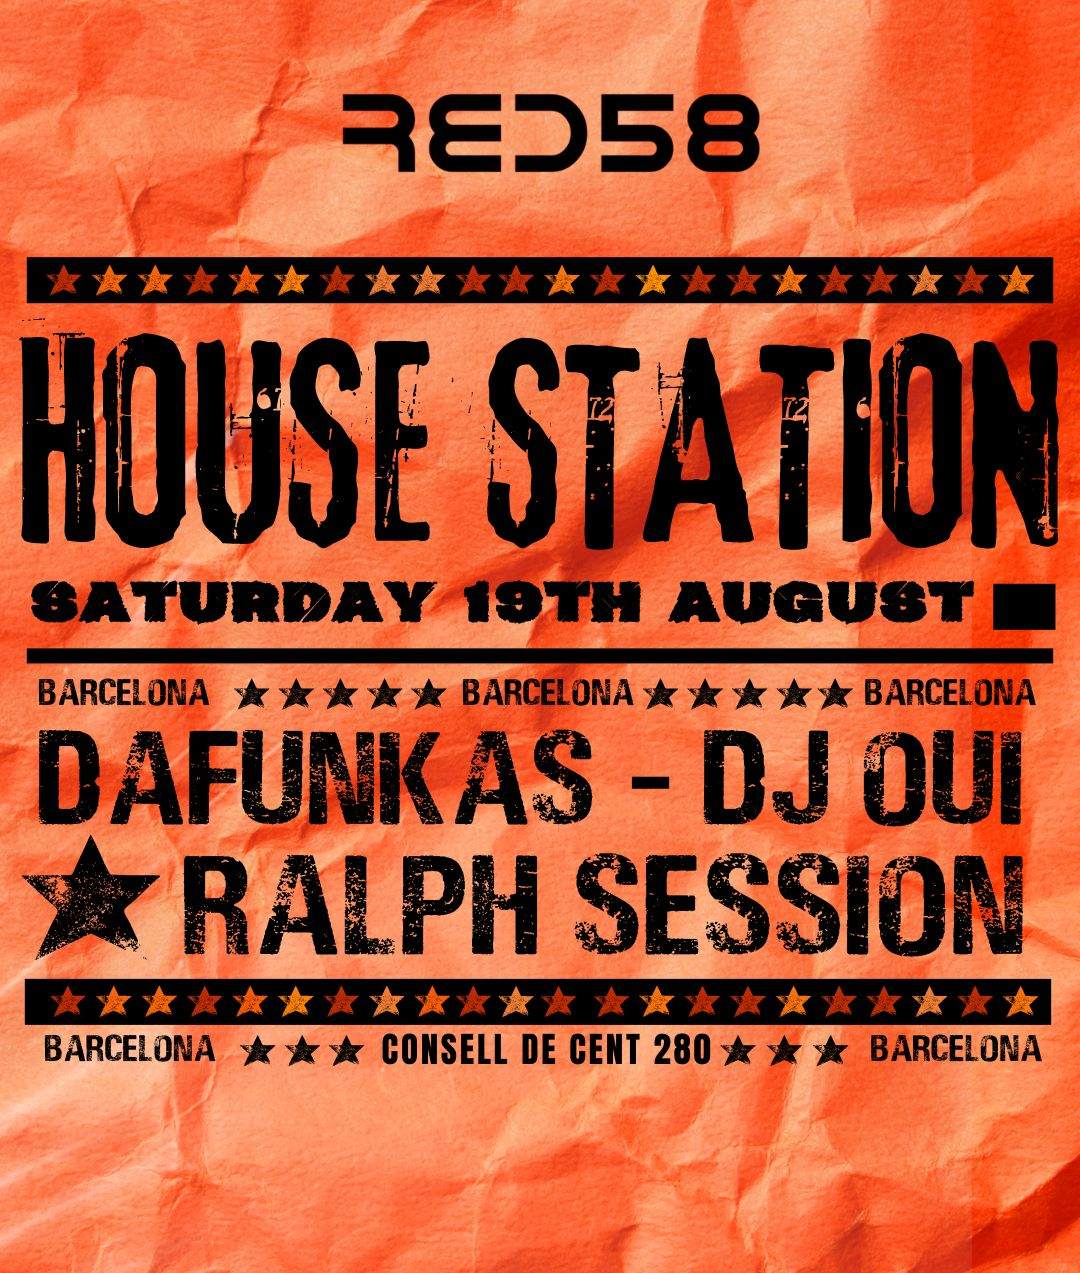 Huouse Station by day & by night: Forum Station + Red 58 Club - フライヤー表